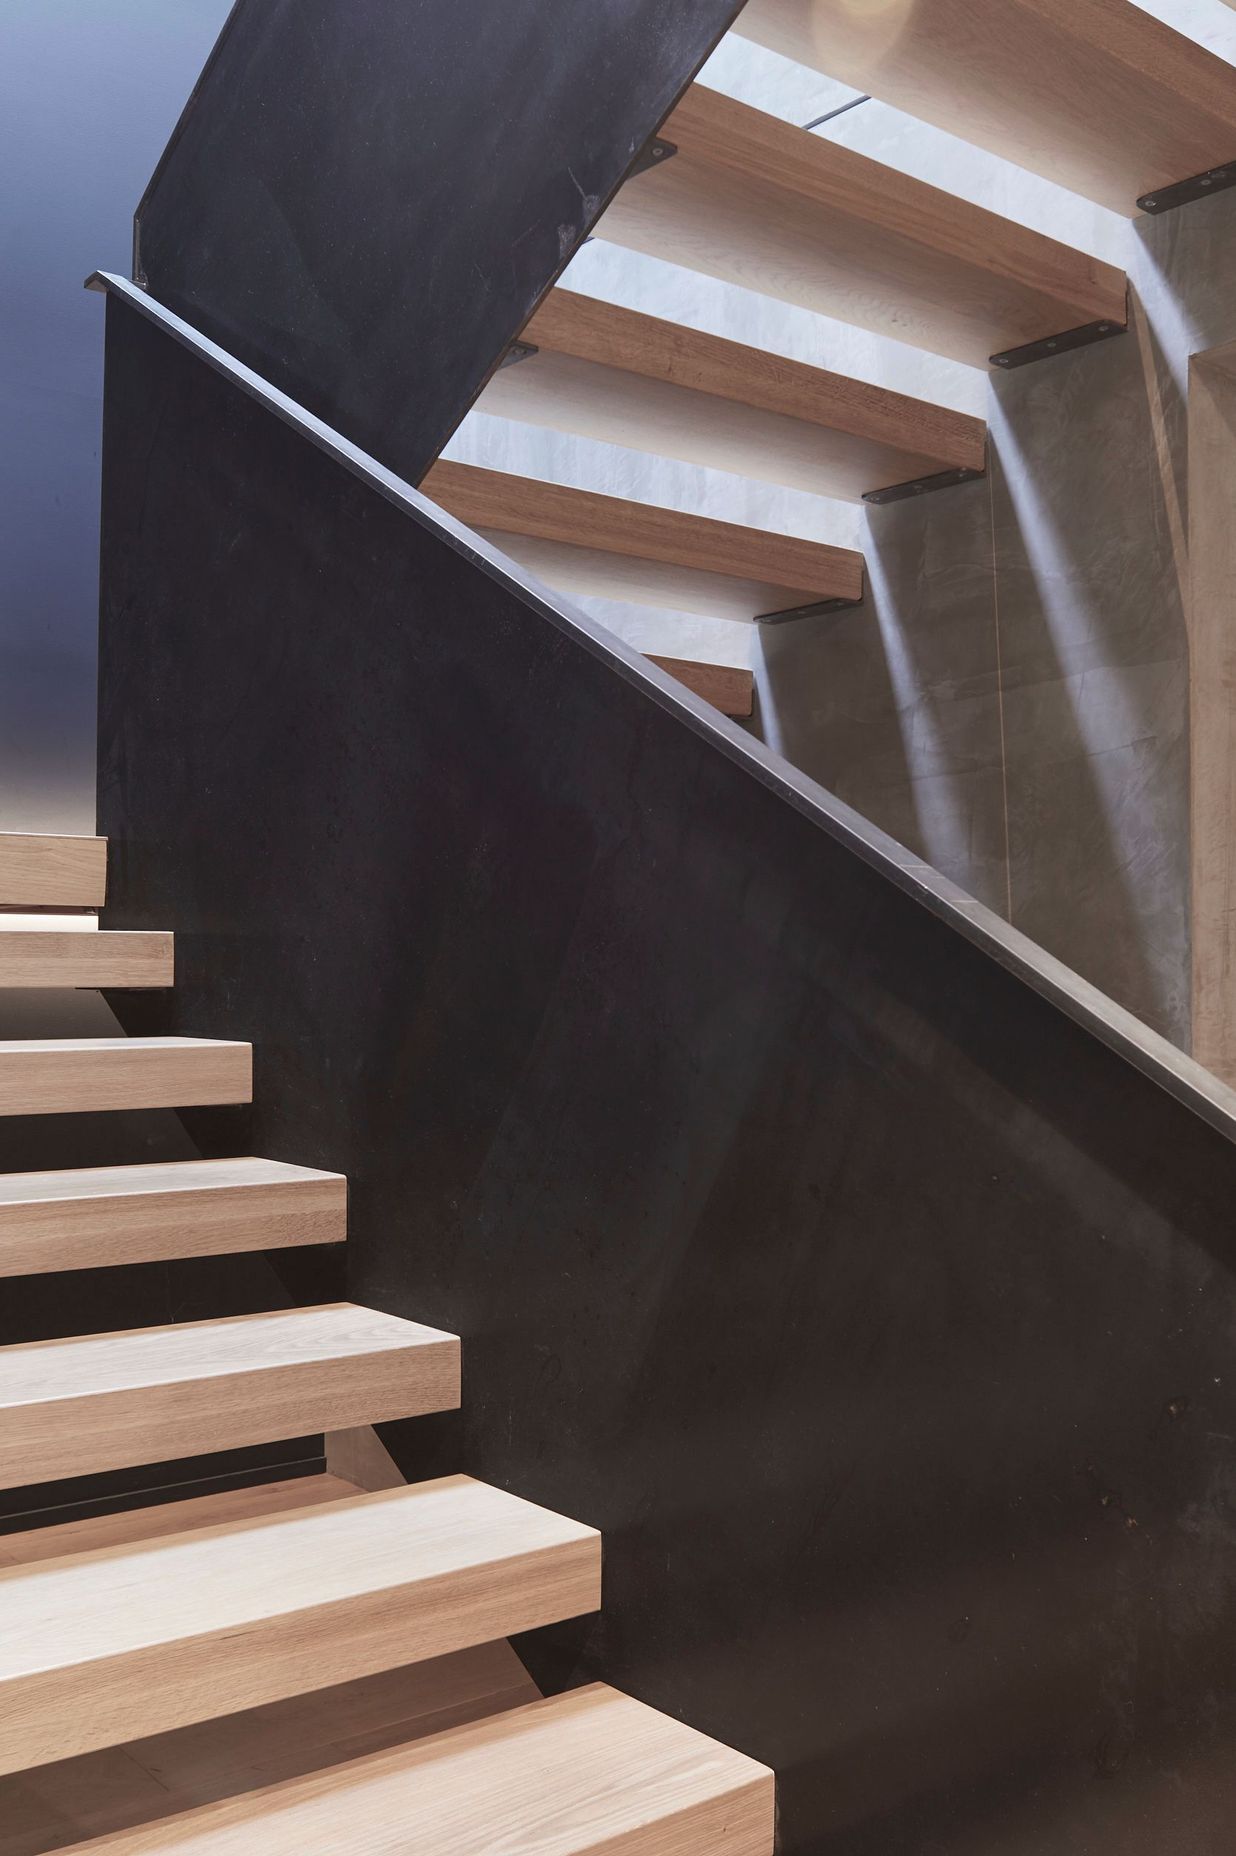 Timber treads help to visually soften the metal balustrades and concrete walls.